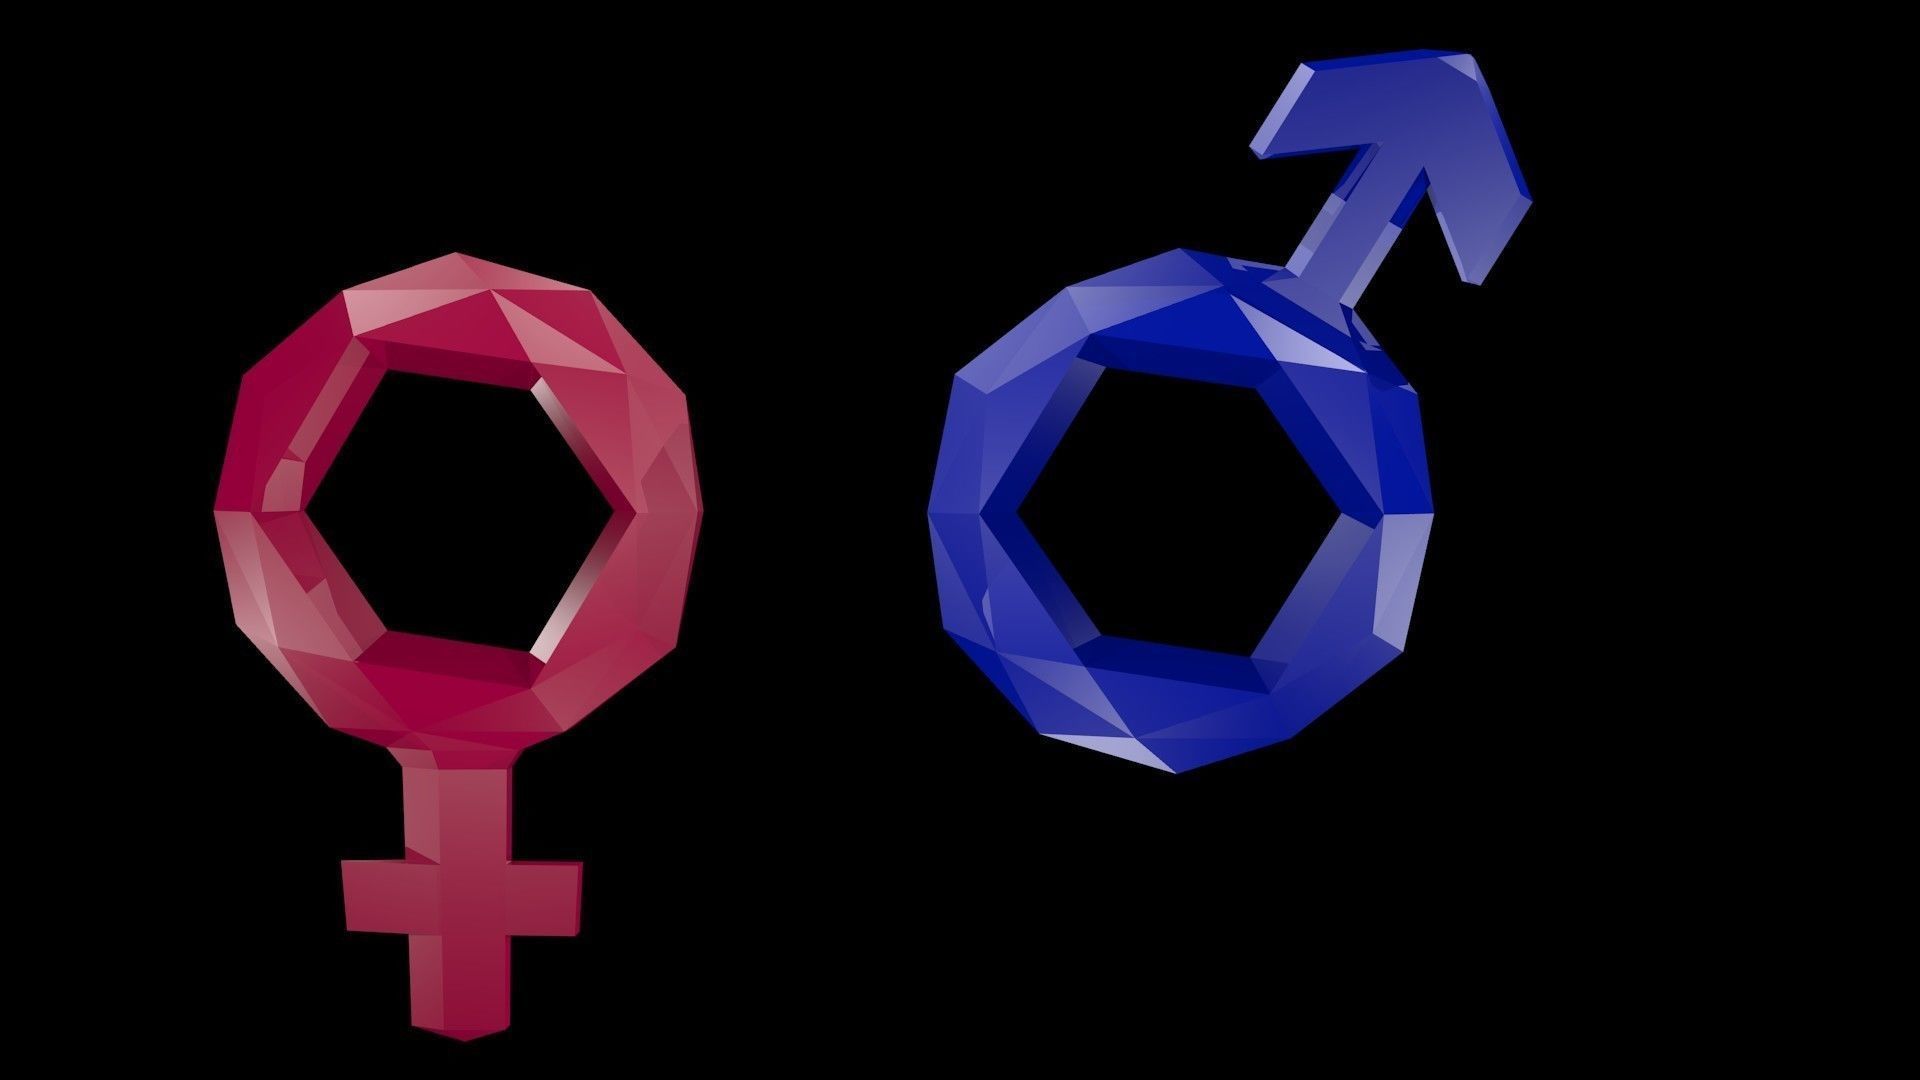 A low poly representation of the male and female symbols - Low poly